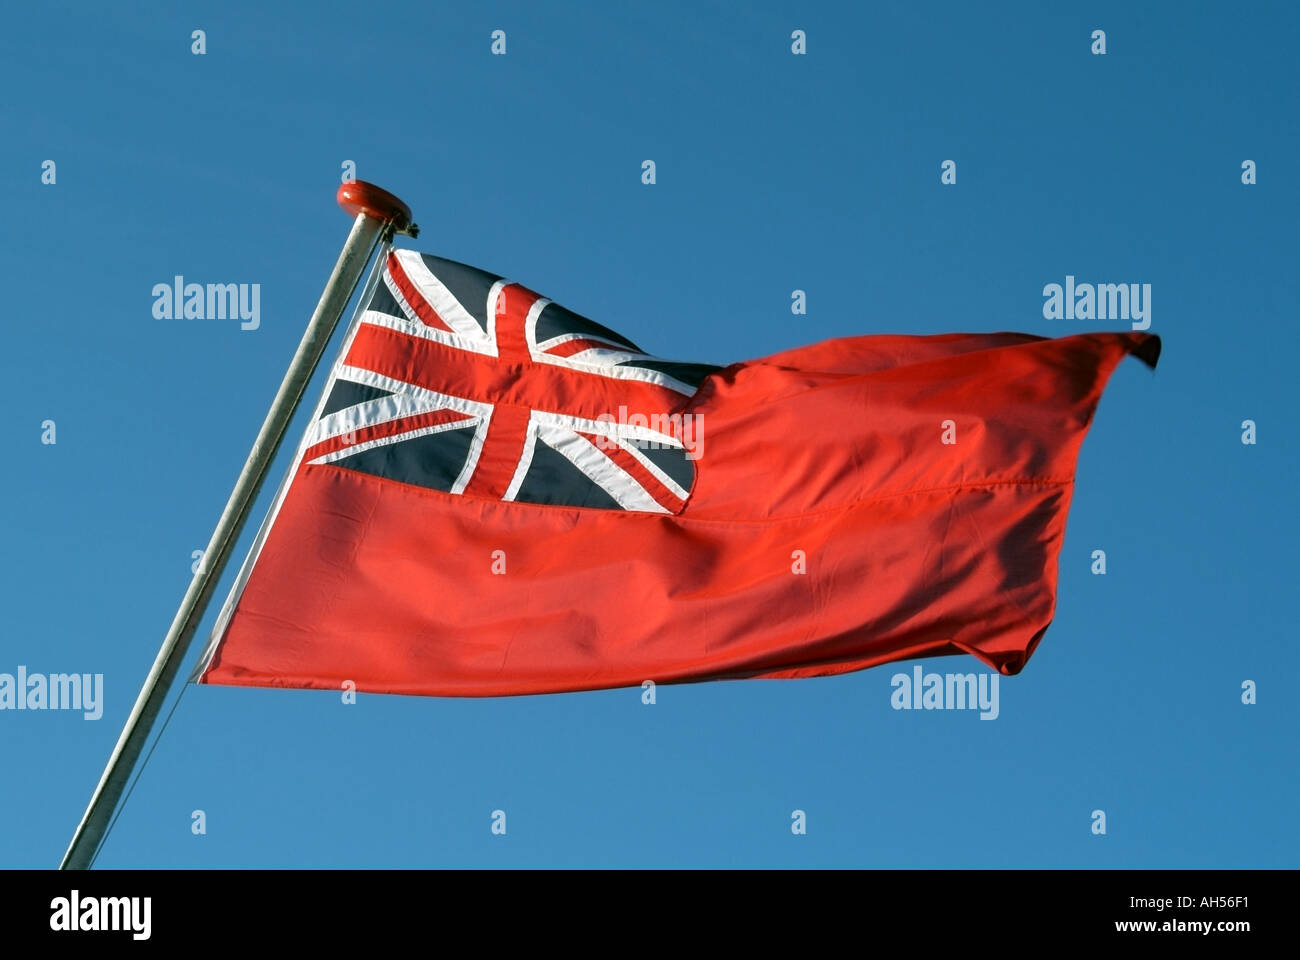 English Channel Red Ensign flag flying on a cross Channel ferry the ensign of the British Merchant Navy Stock Photo